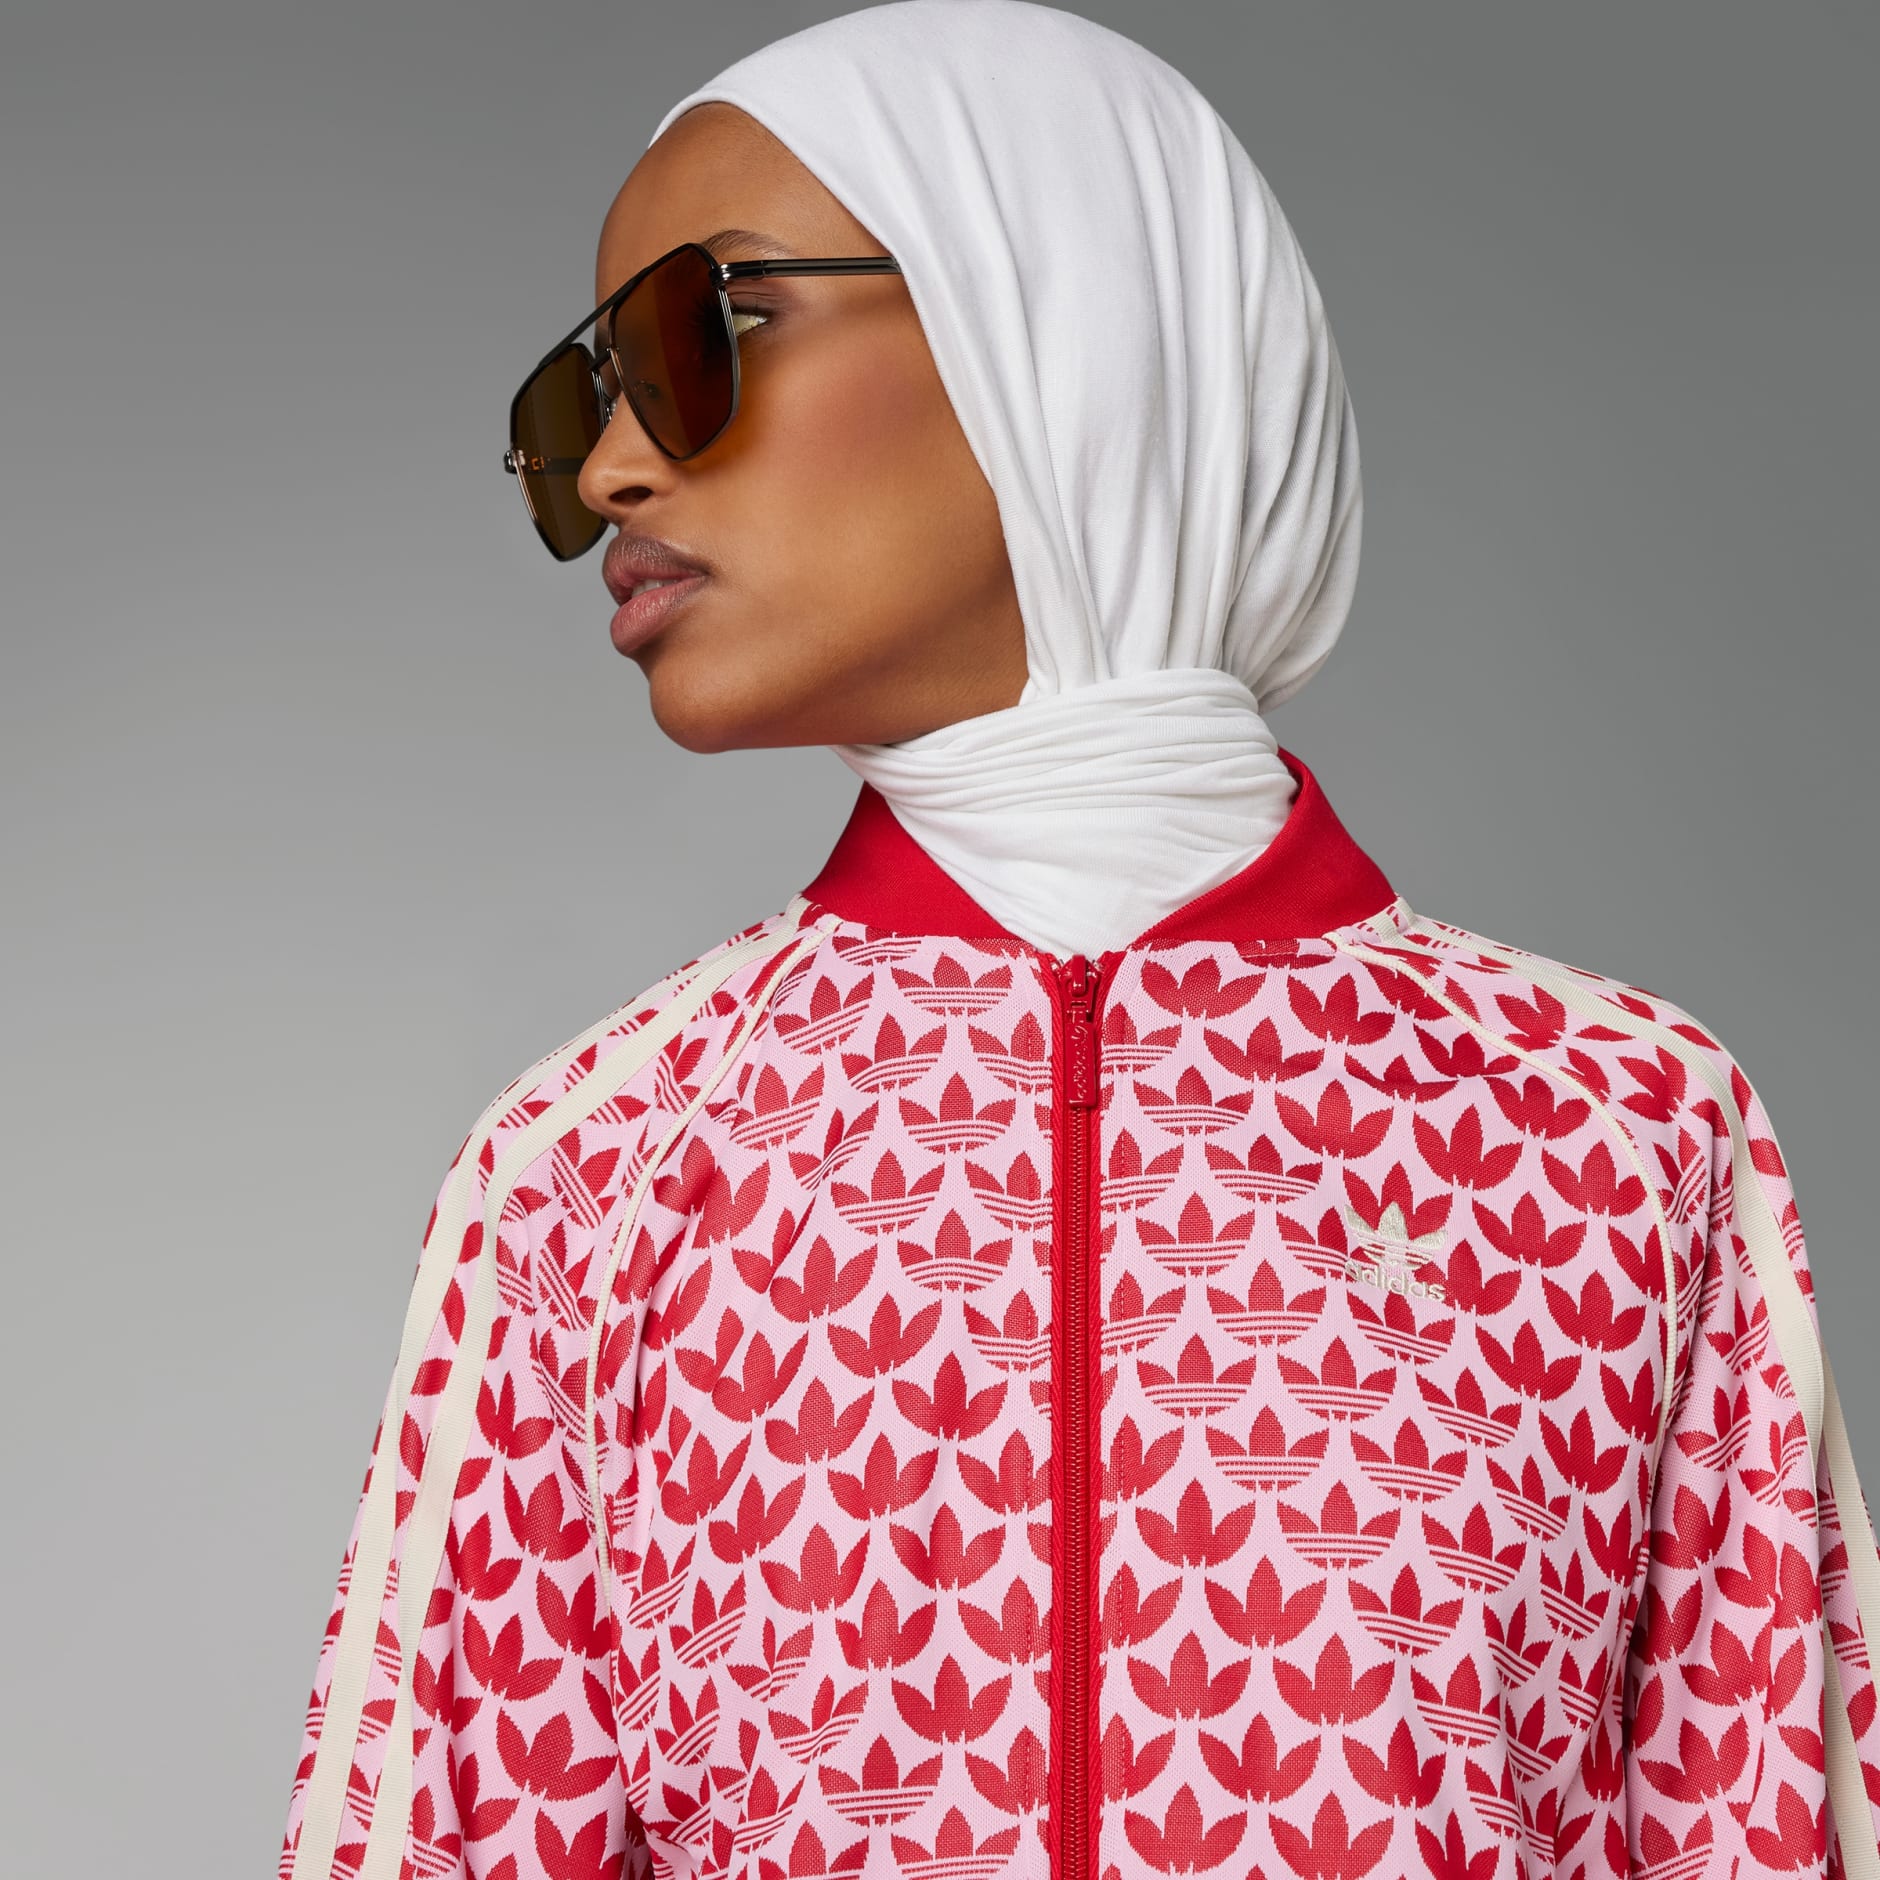 Women's Clothing - Adicolor 70s SST Track Top - Pink | adidas Egypt